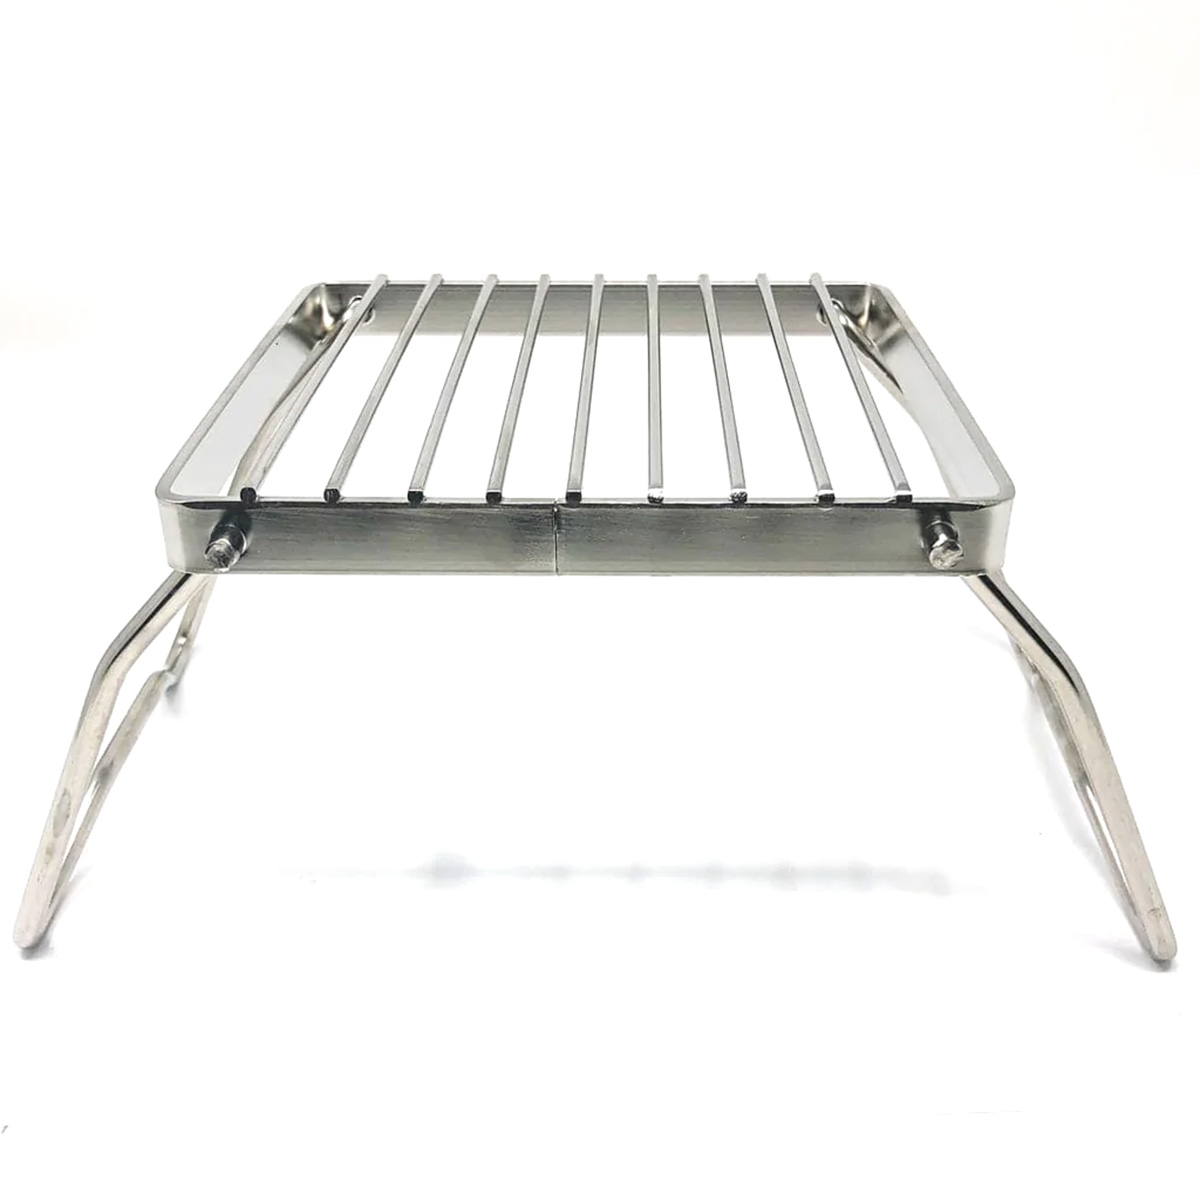 Pathfinder Stainless Steel Folding Grill